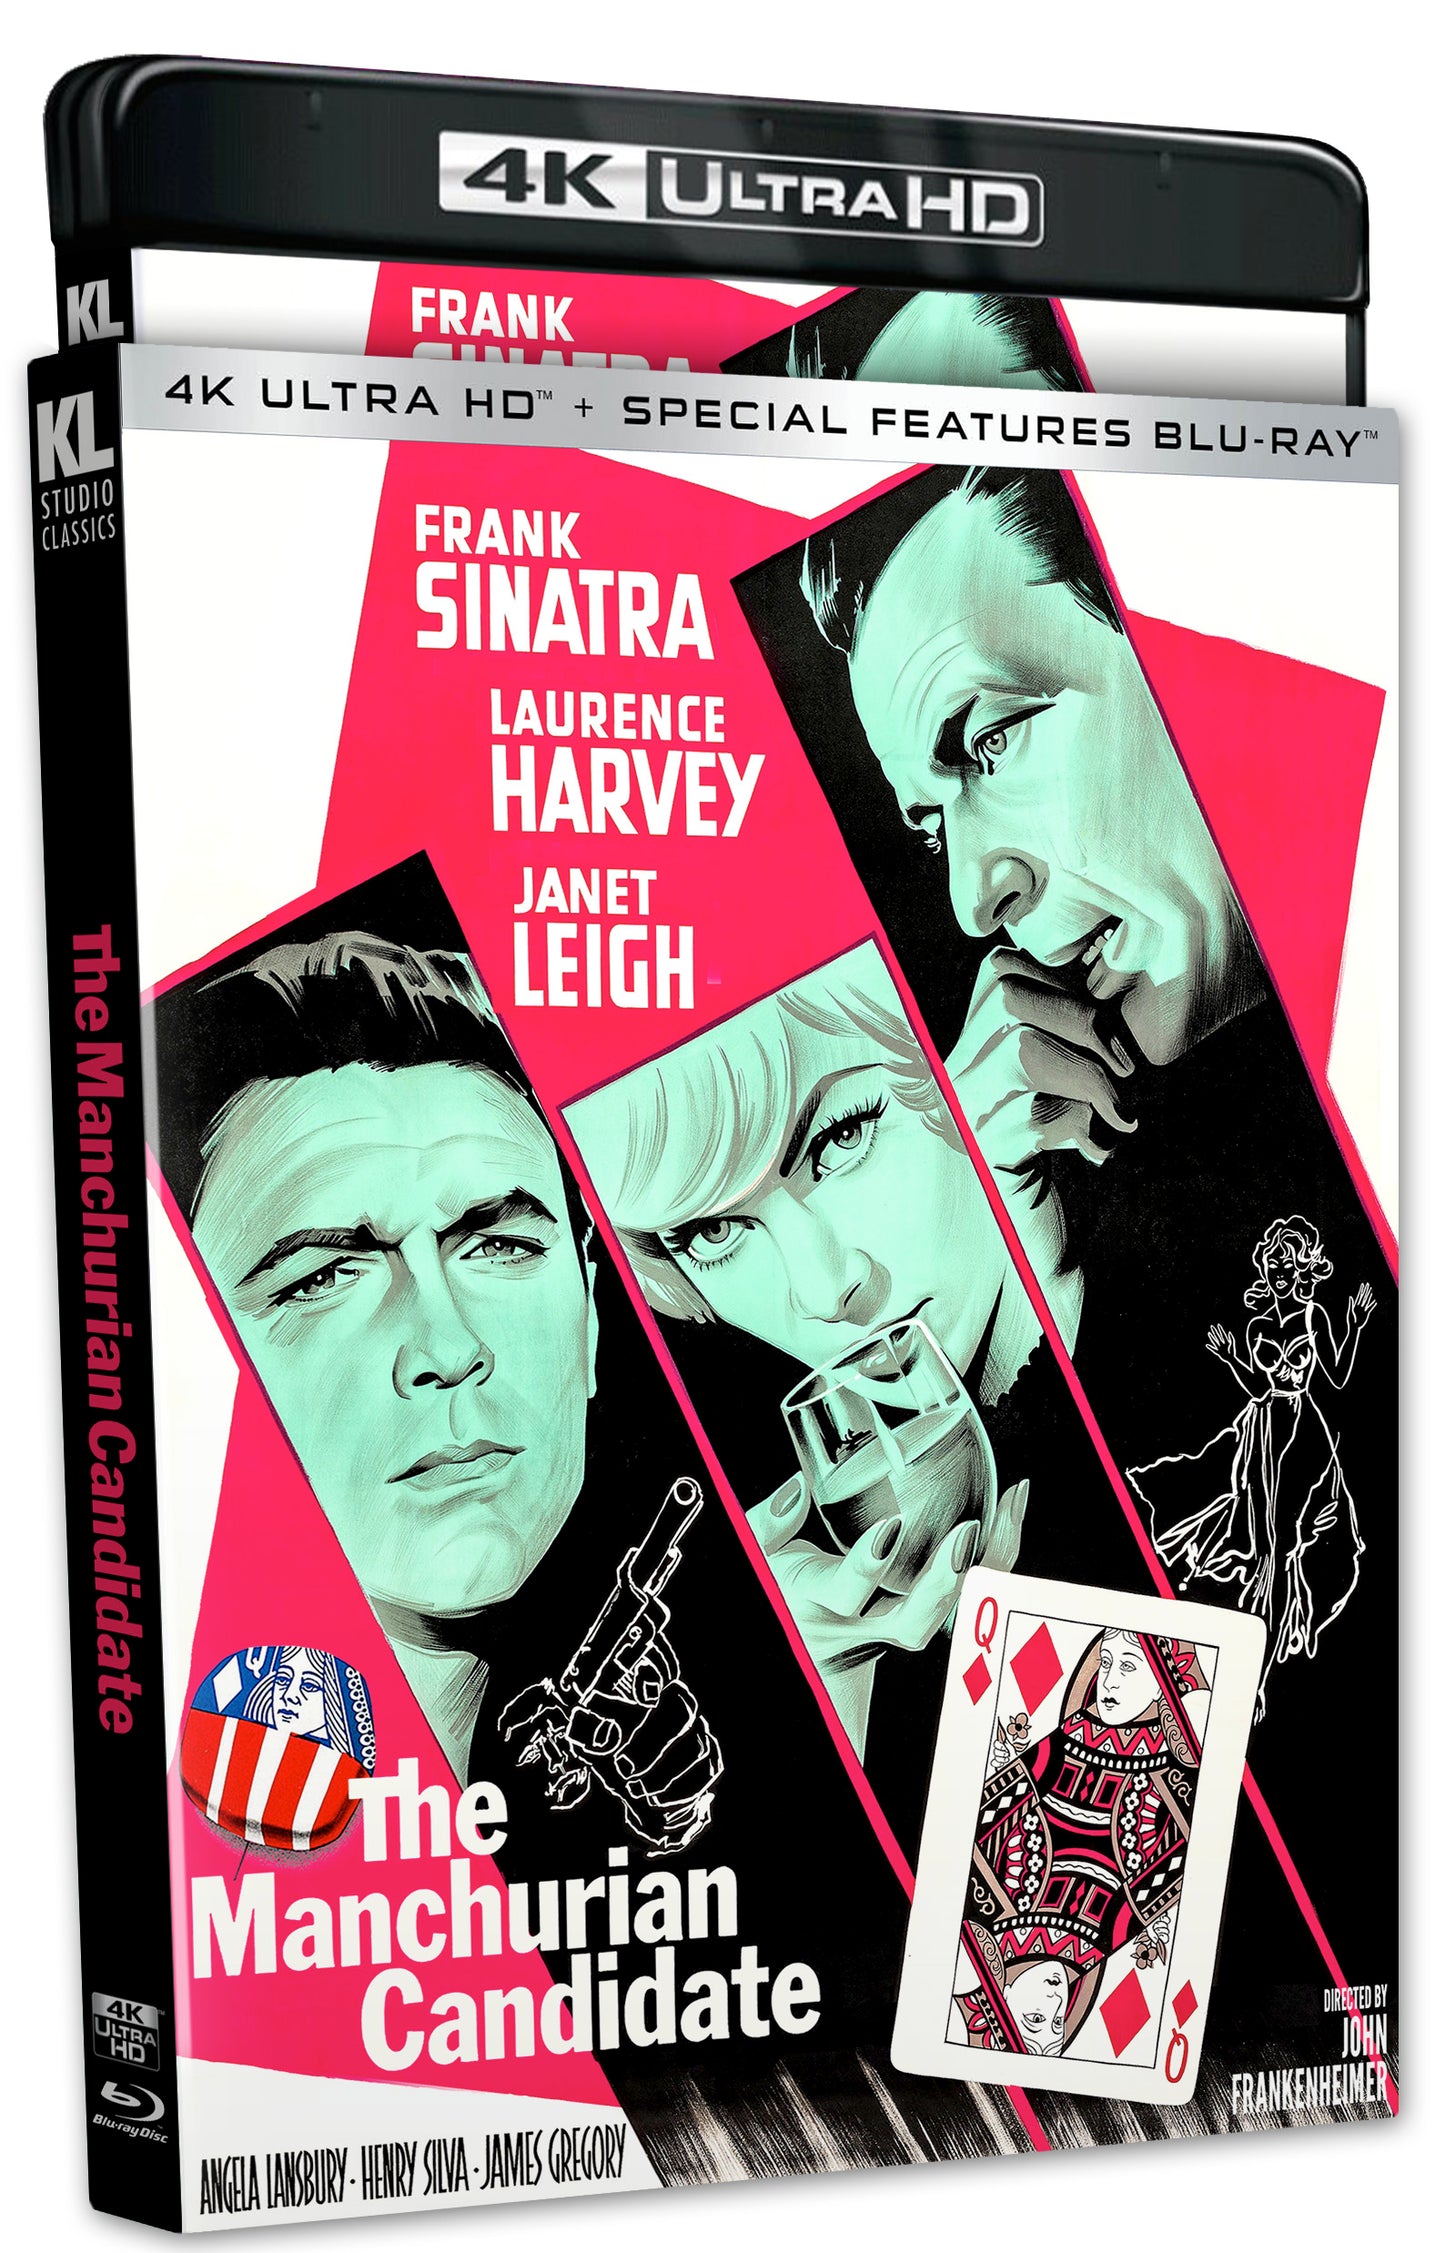 The Manchurian Candidate (1962) 4K UHD + Sp. Features Blu-ray with Slipcover (Kino Lorber)